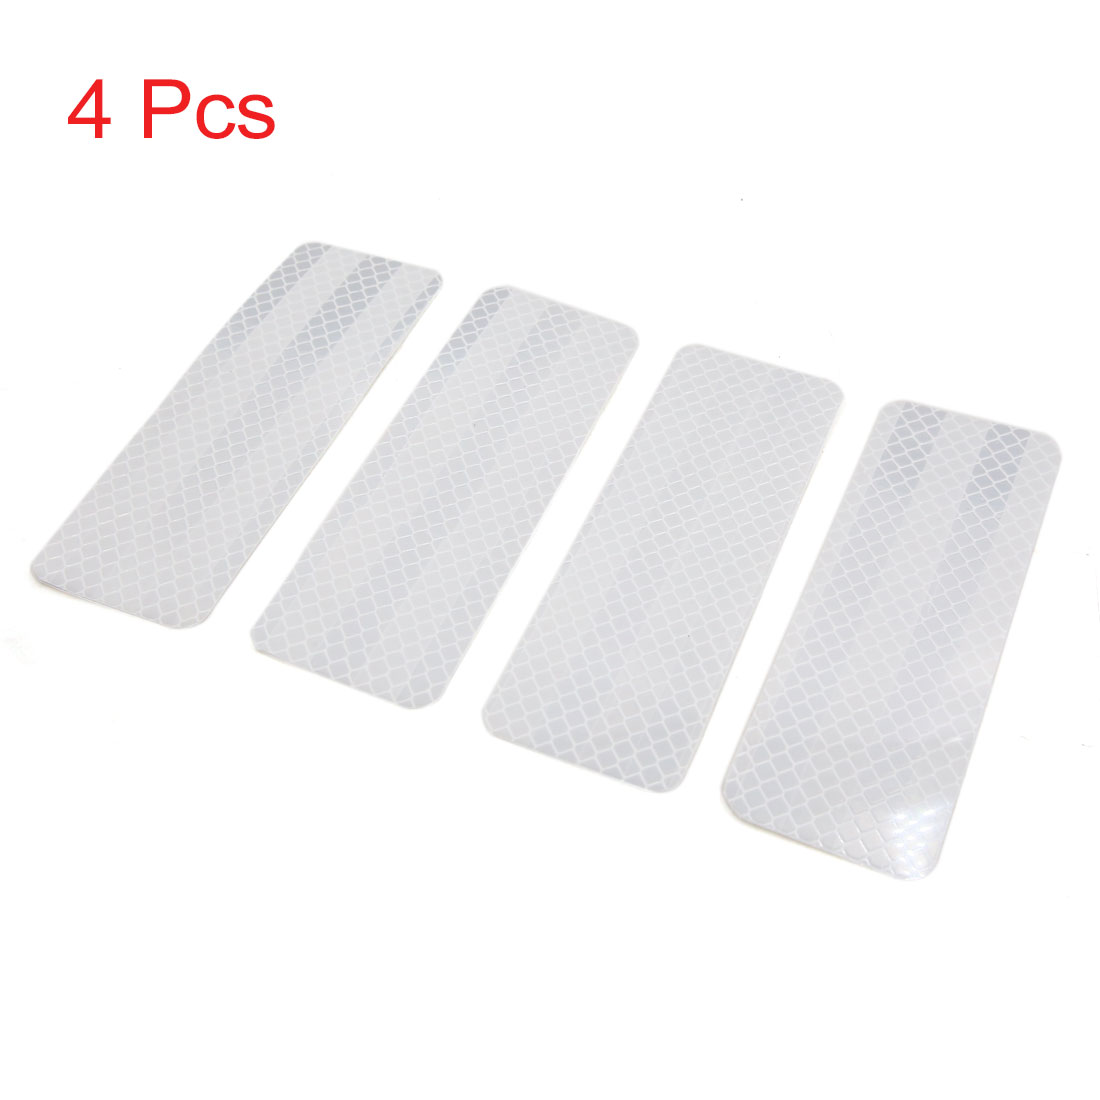 Unique Bargains 4Pcs 4x12cm White Safety Warning Night Reflective Strip Tape Sticker for Car